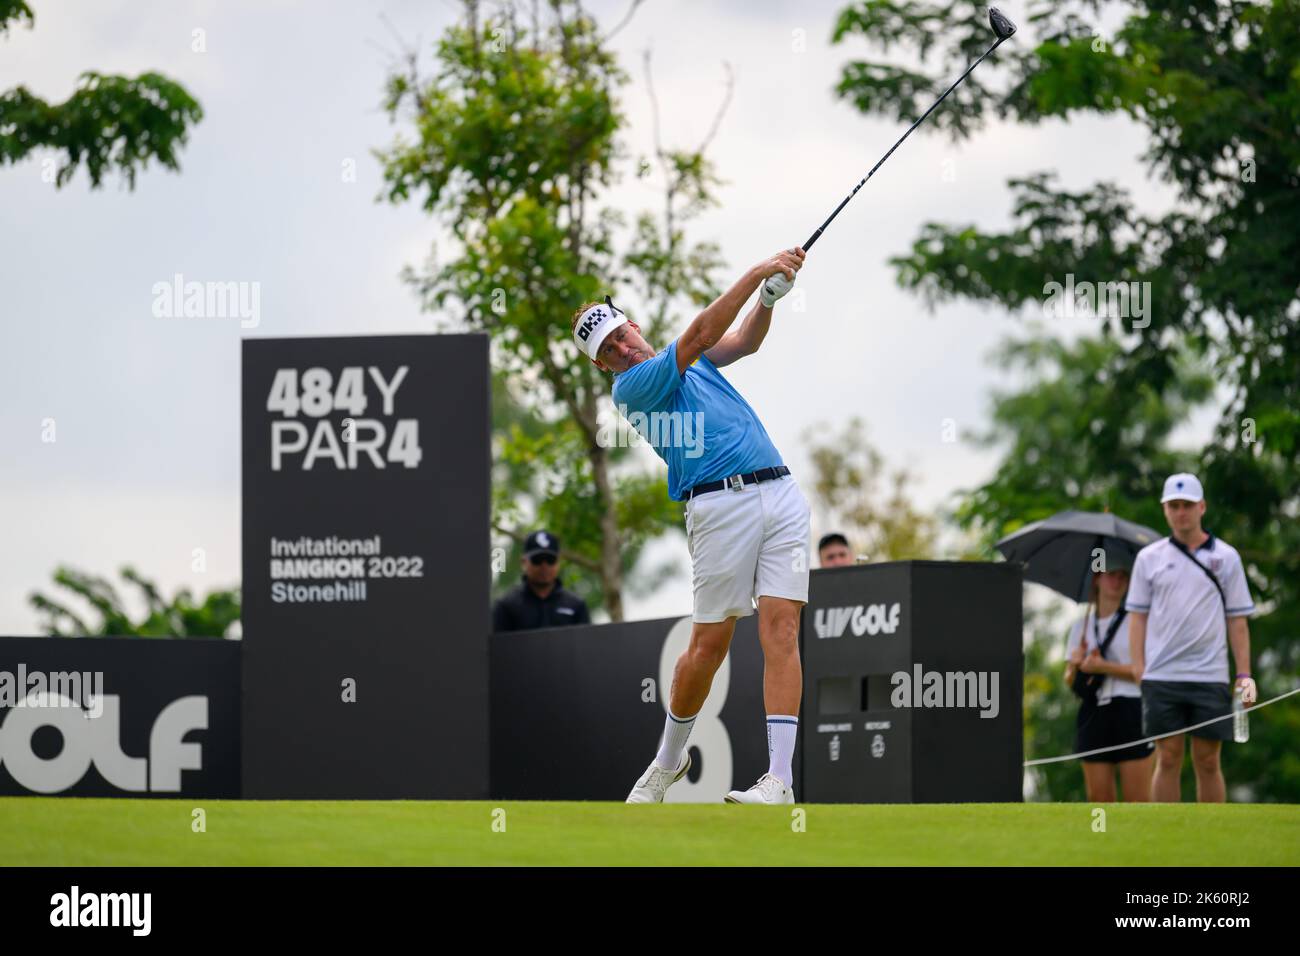 Ian Poulter of England tees off hole 8 during the final round of the LIV Golf Invitational Bangkok at Stonehill Golf Course in Bangkok, THAILAND Stock Photo